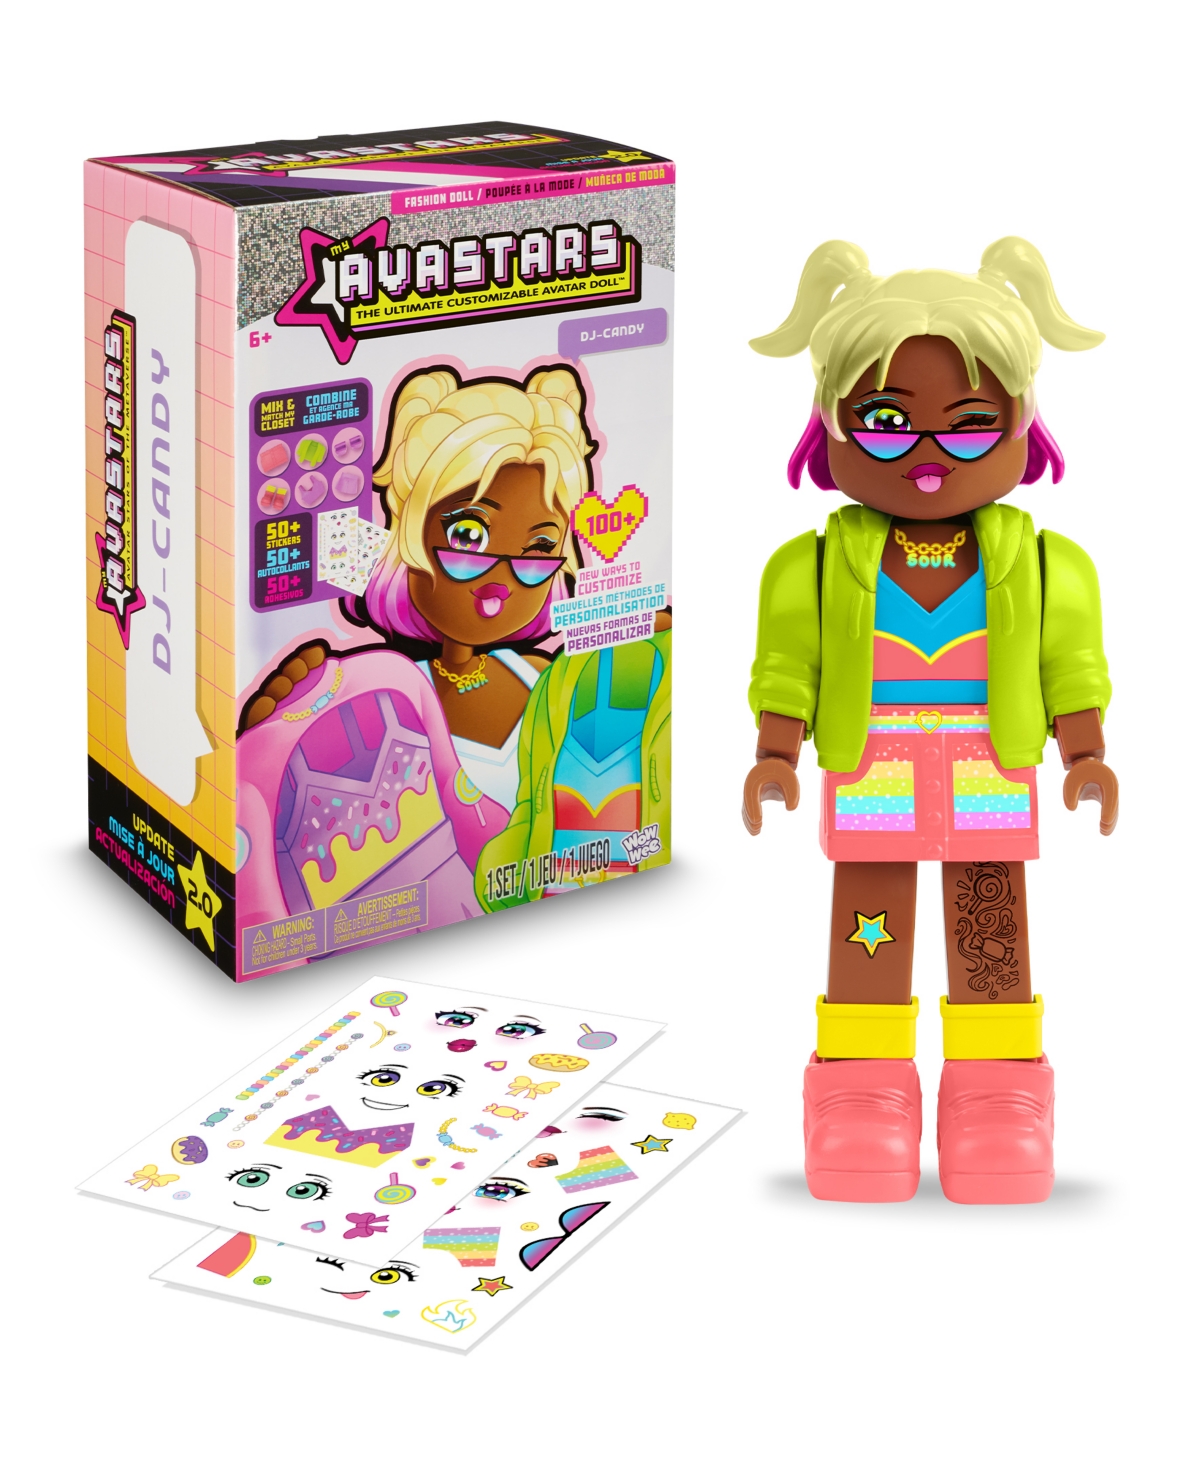 Avastars Kids' Doll Dj Candy Created By Wowwee In Multi